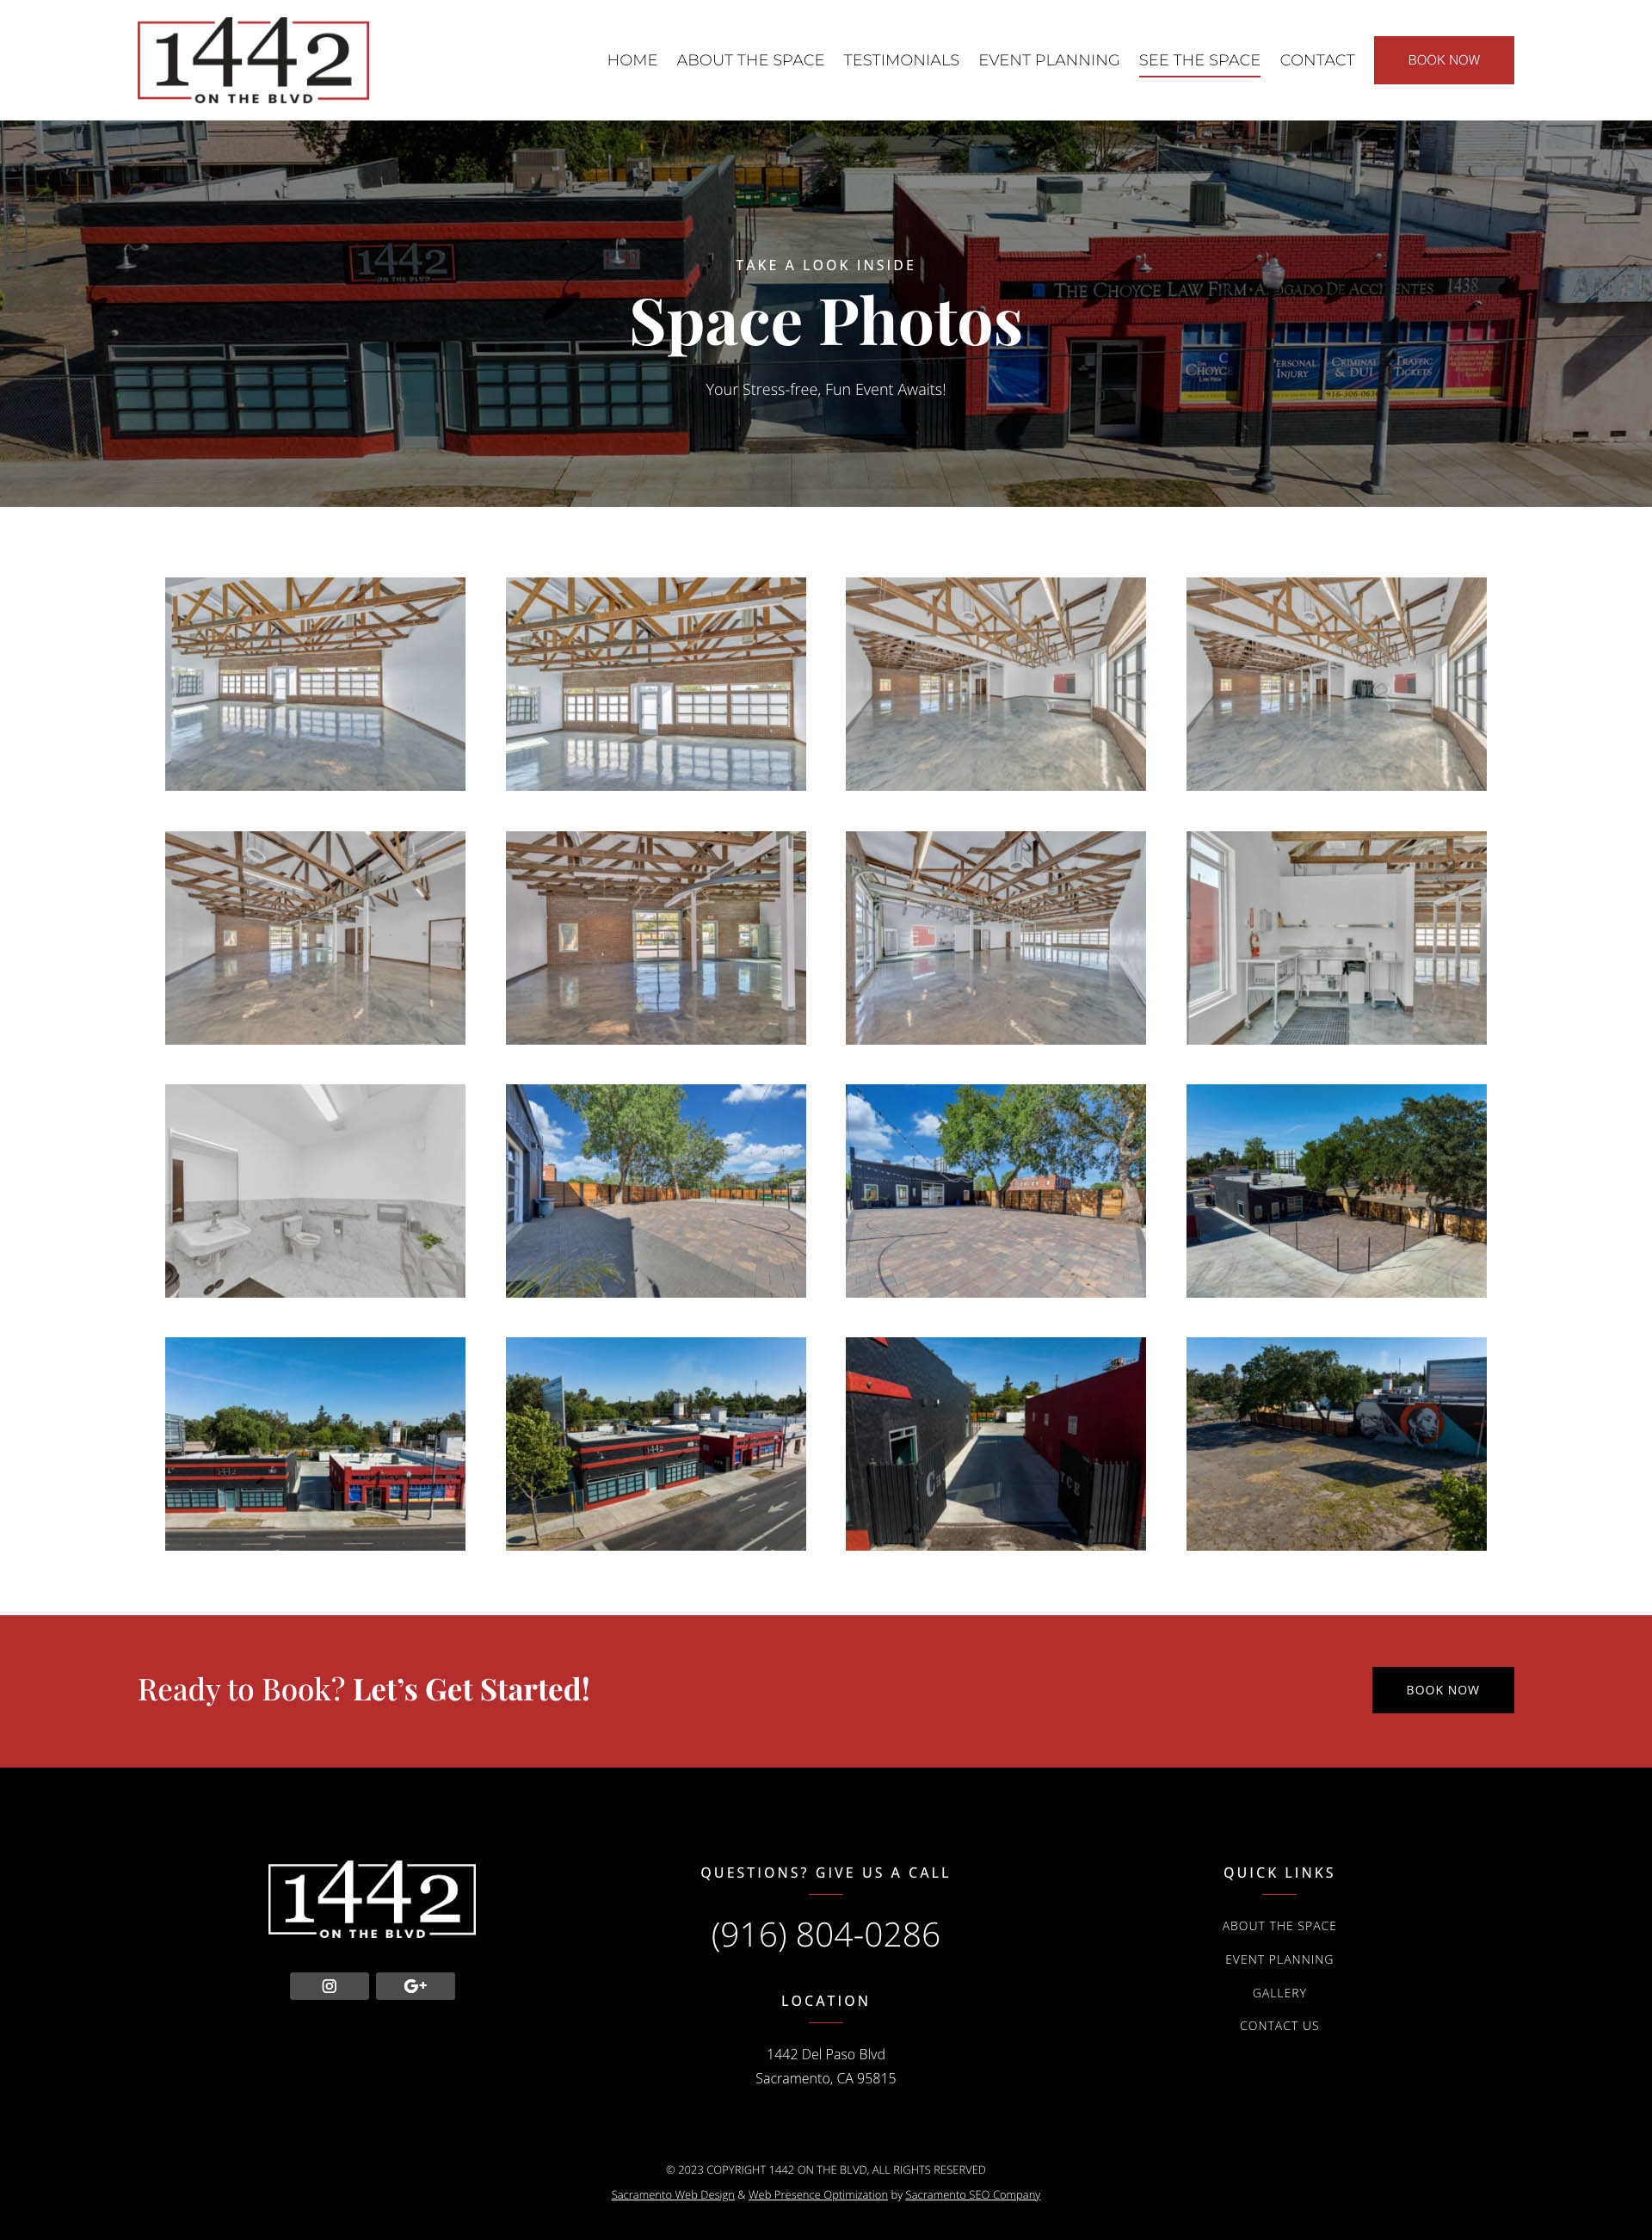 1442 On the Blvd - Space Photos Page